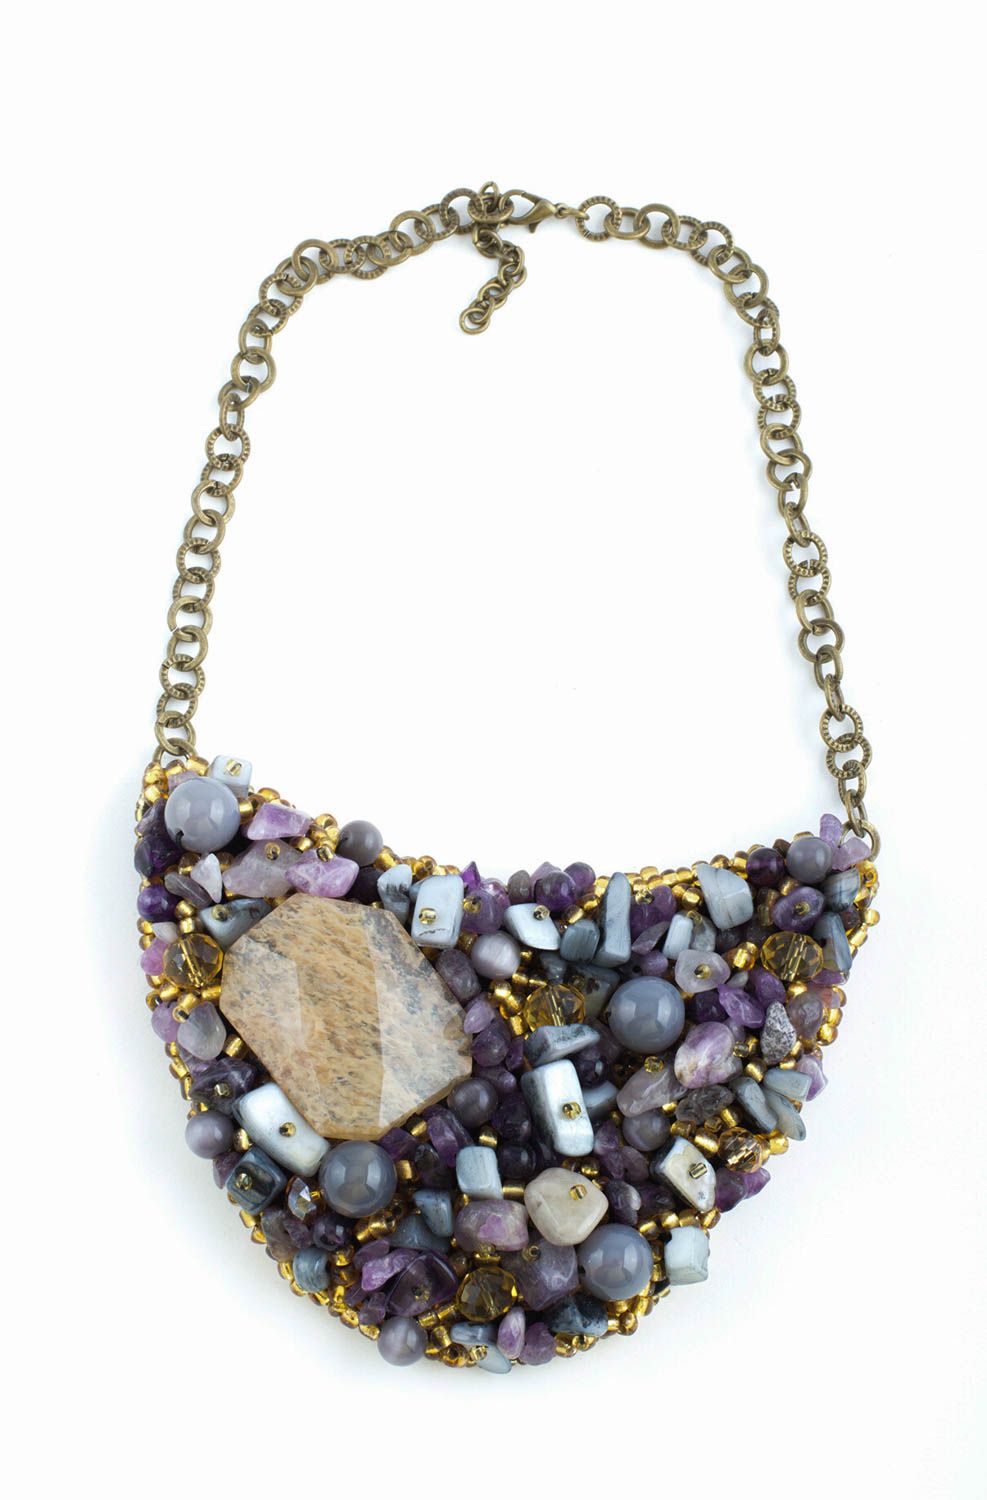 Handmade unusual necklace elegant evening necklace jewelry with natural stone photo 3